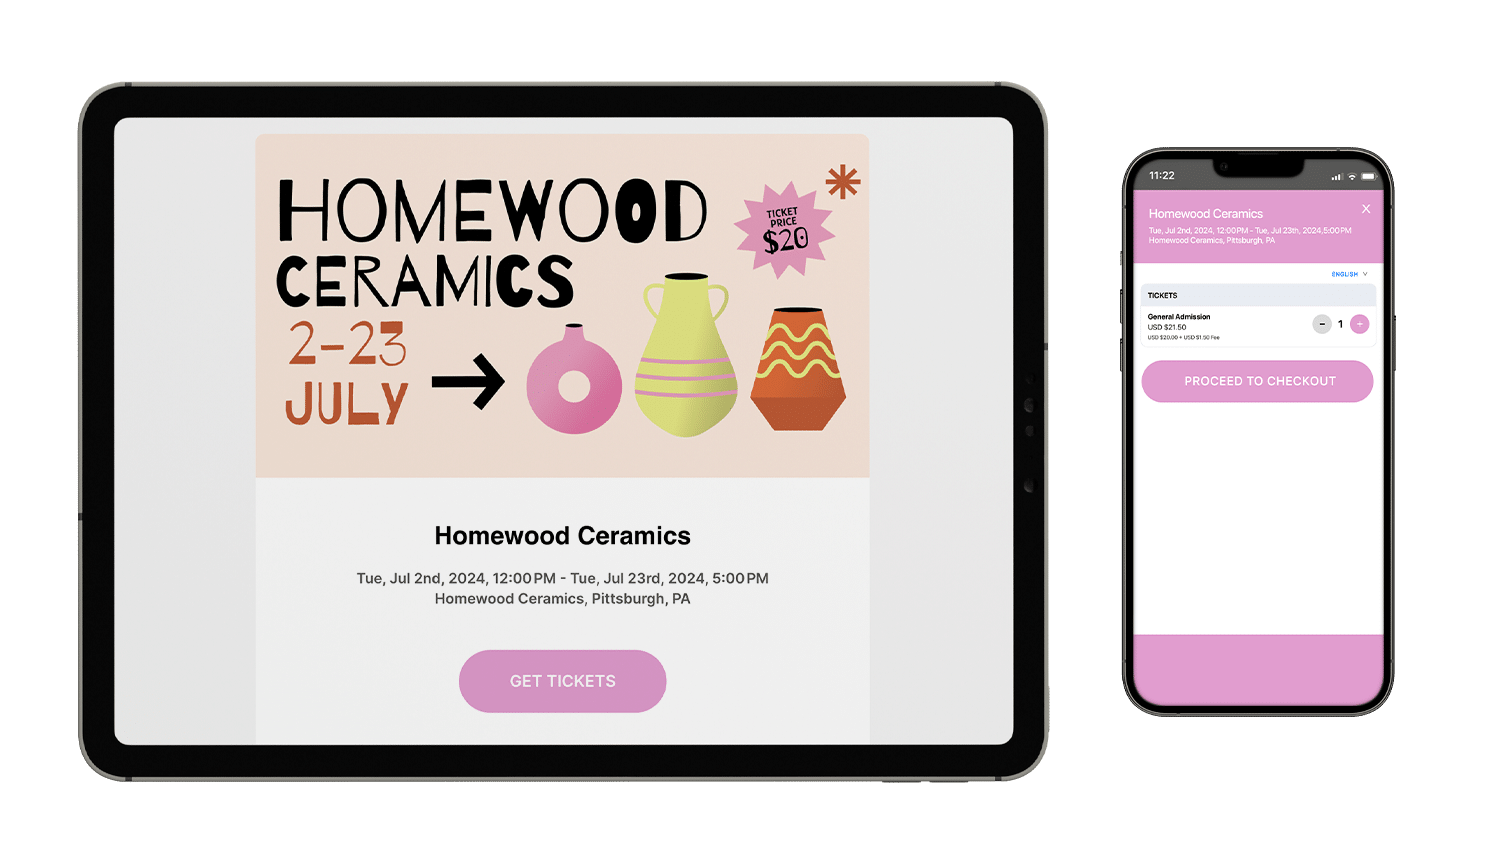 An event mockup of Homewood Ceramics on a tablet and mobile phone